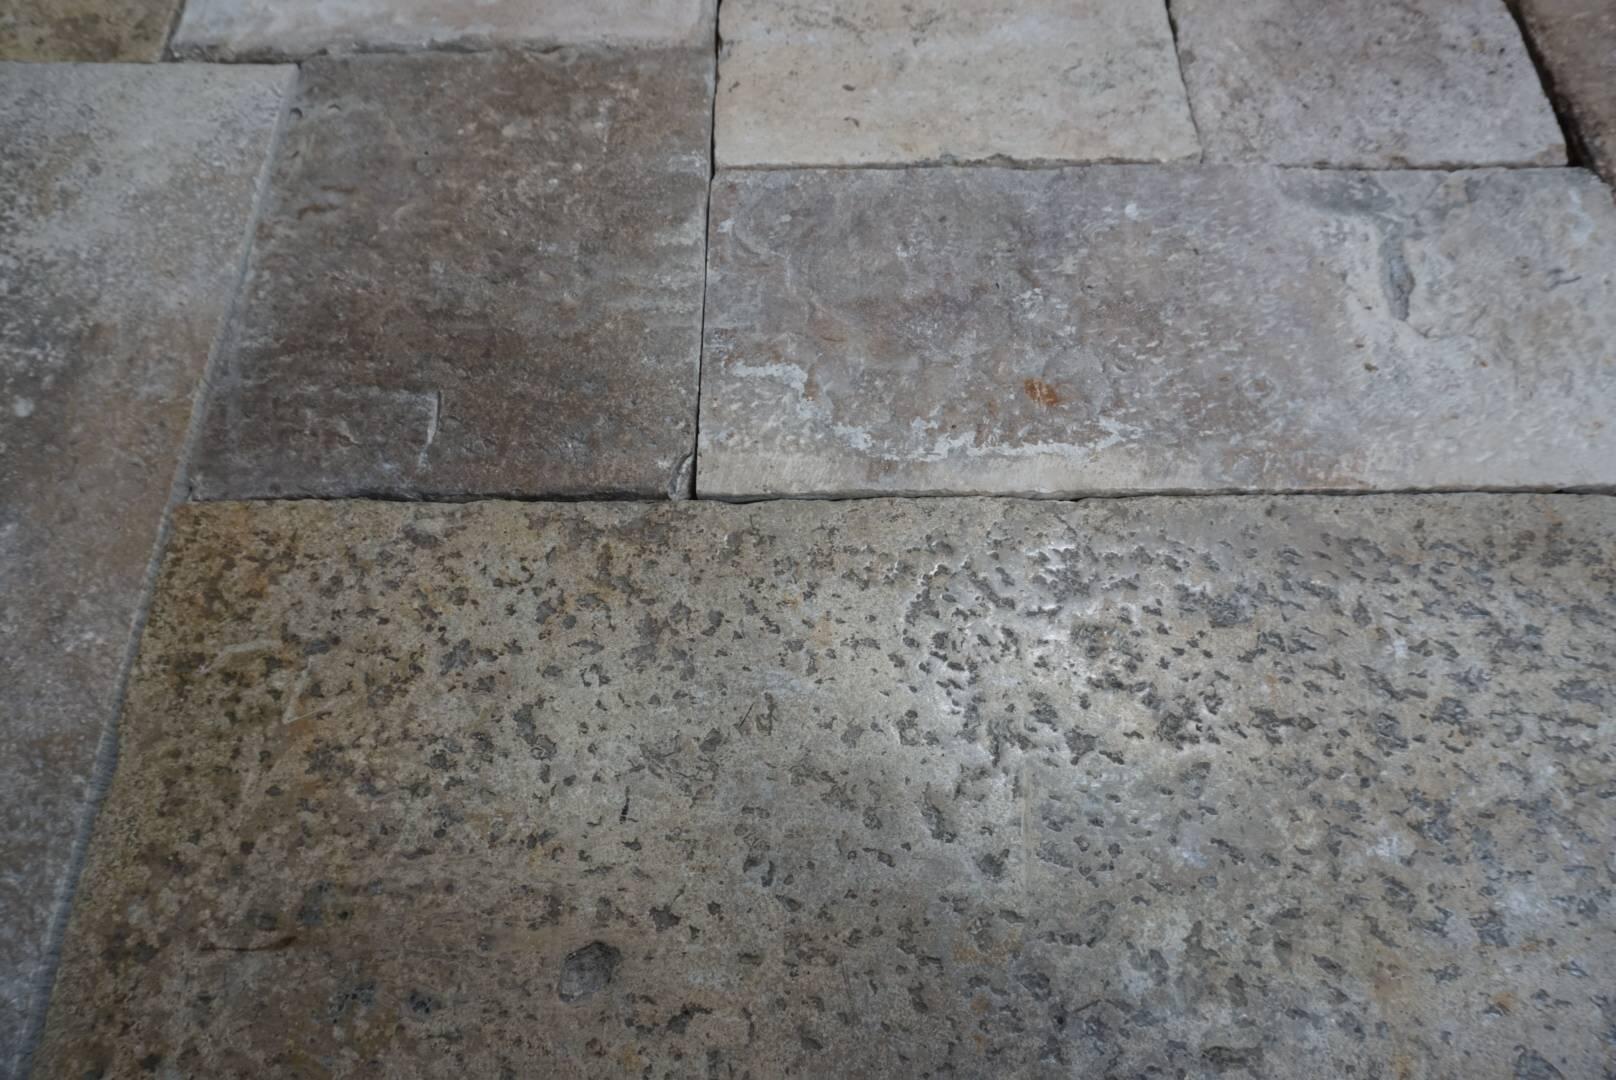 This unique antique flooring dates back to the 16th century. Reclaimed from the burgundy region of France, this flooring's natural patina and texture are unique to the lot it came from. Once this last lot is sold there's no way to re-order it.